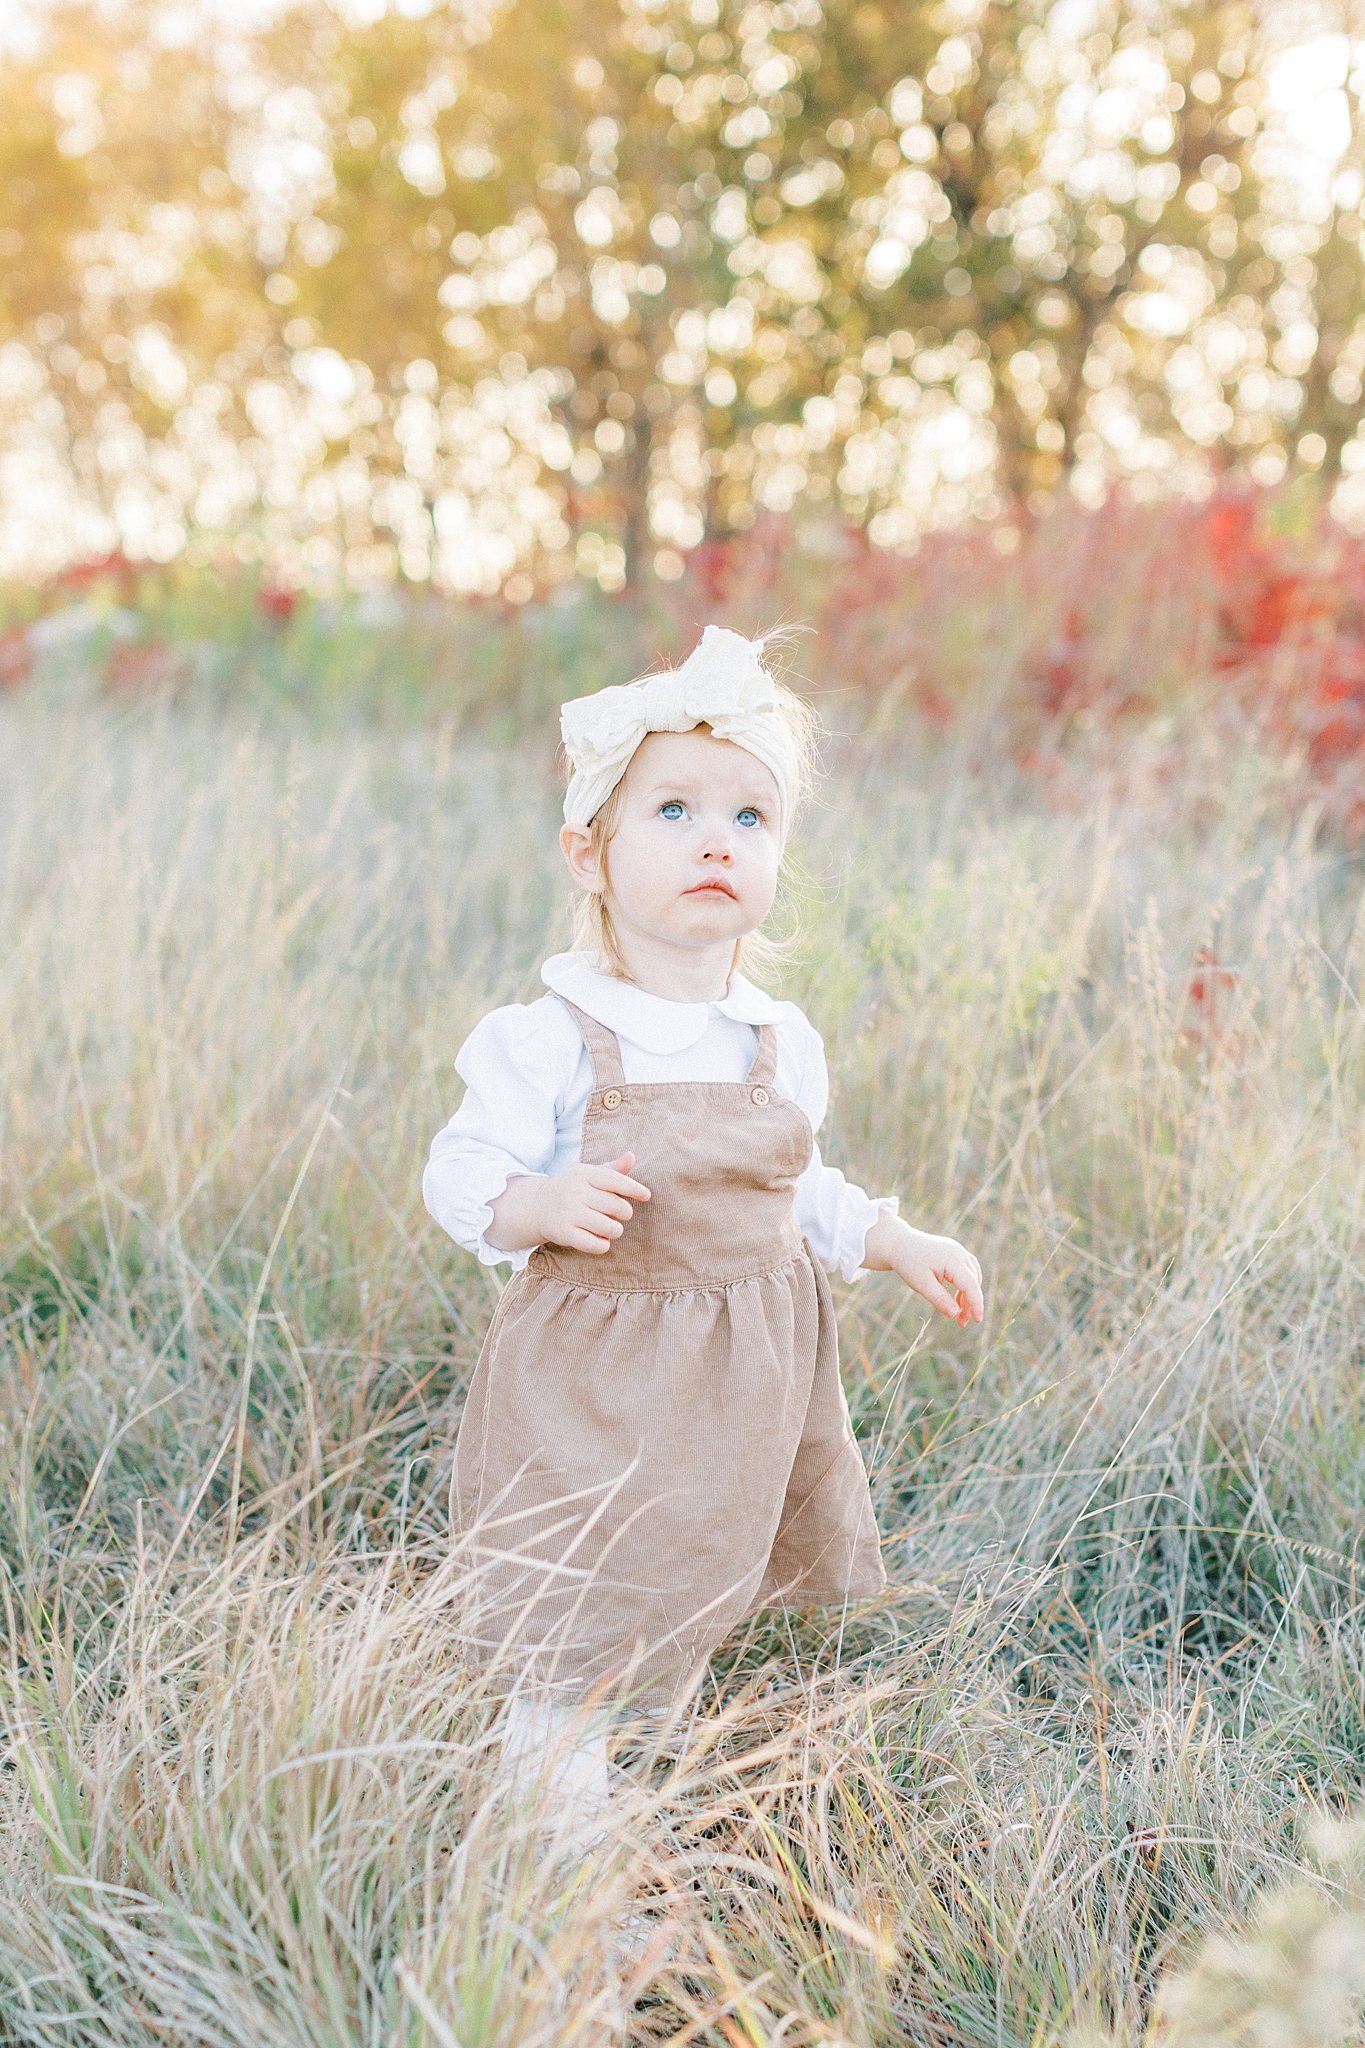 A young toddler girl in a brown dress looks up at some trees while wandering a field of tall grass at sunset